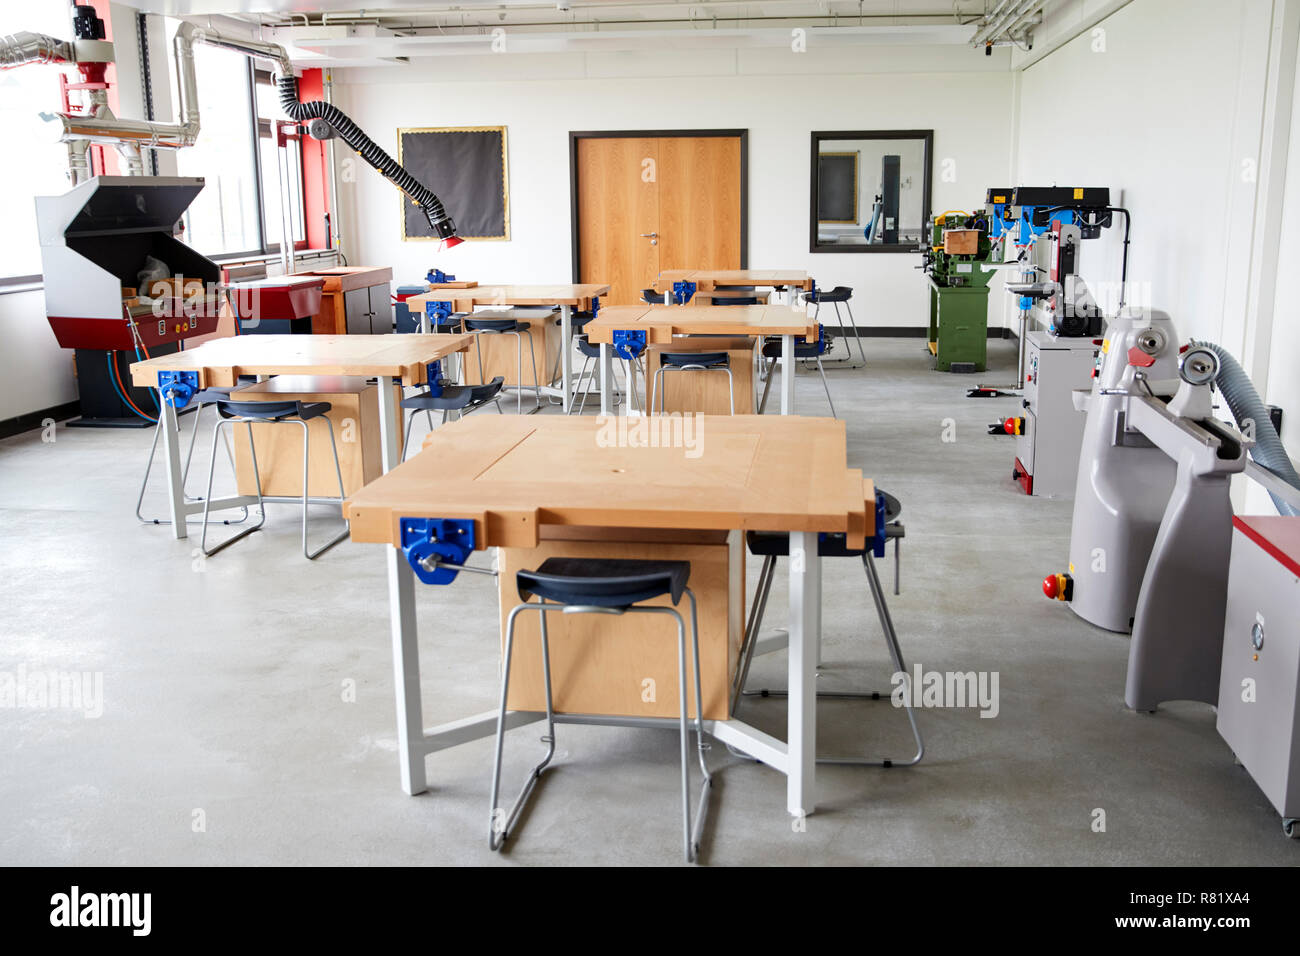 View Of Work Benches And Machinery In High School Design And Technology Classroom Stock Photo